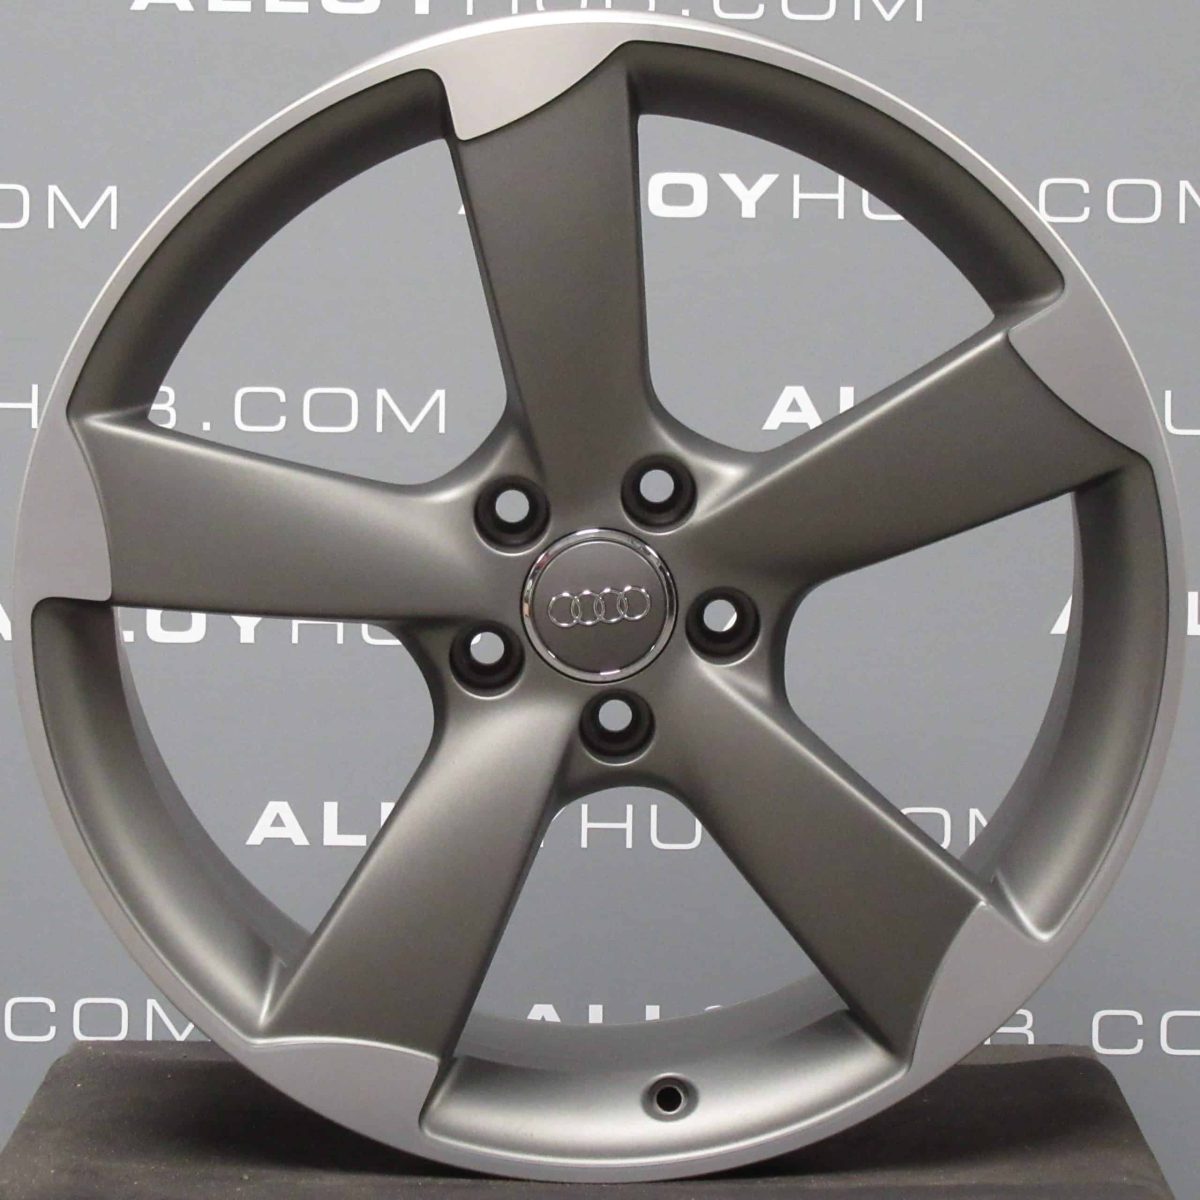 Genuine Audi A6 4G Rotor Arm 20" Inch Alloy Wheels with Grey & Diamond Turned Finish 4G0 601 025 BP